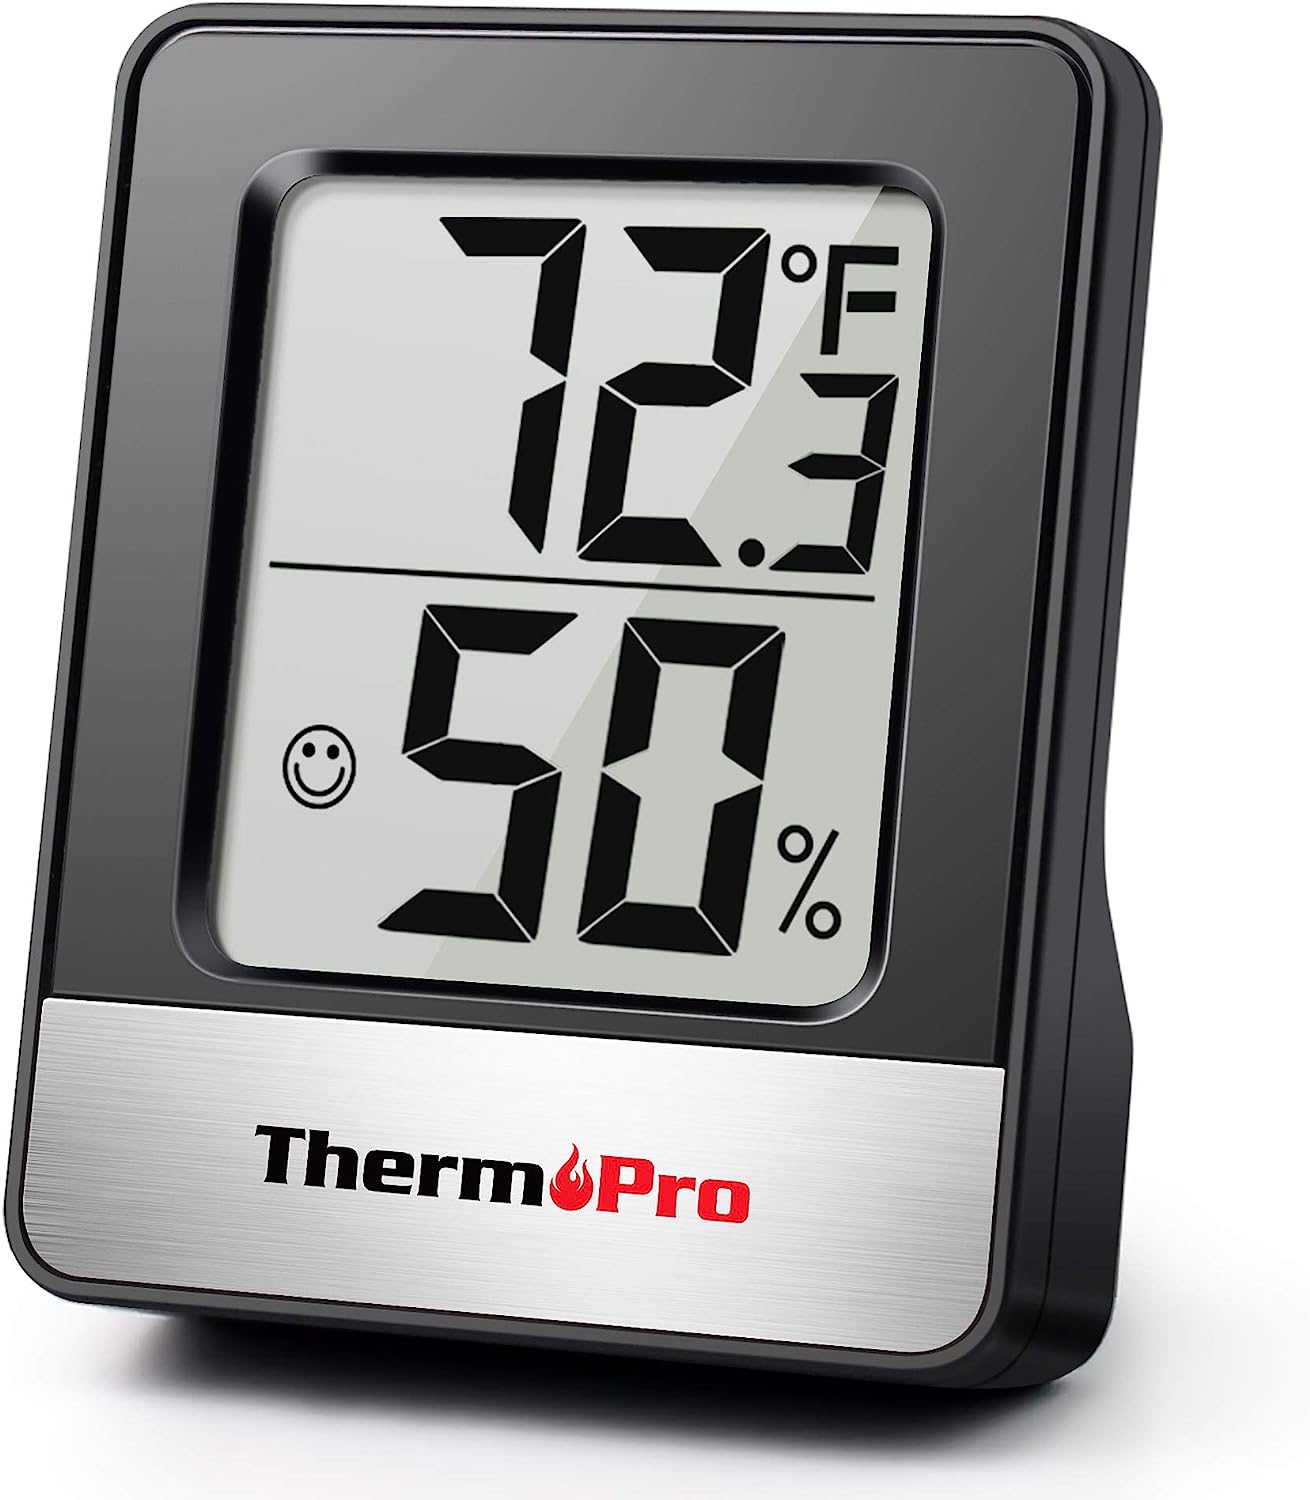 ThermoPro TP49 Digital Hygrometer Indoor Thermometer [...]